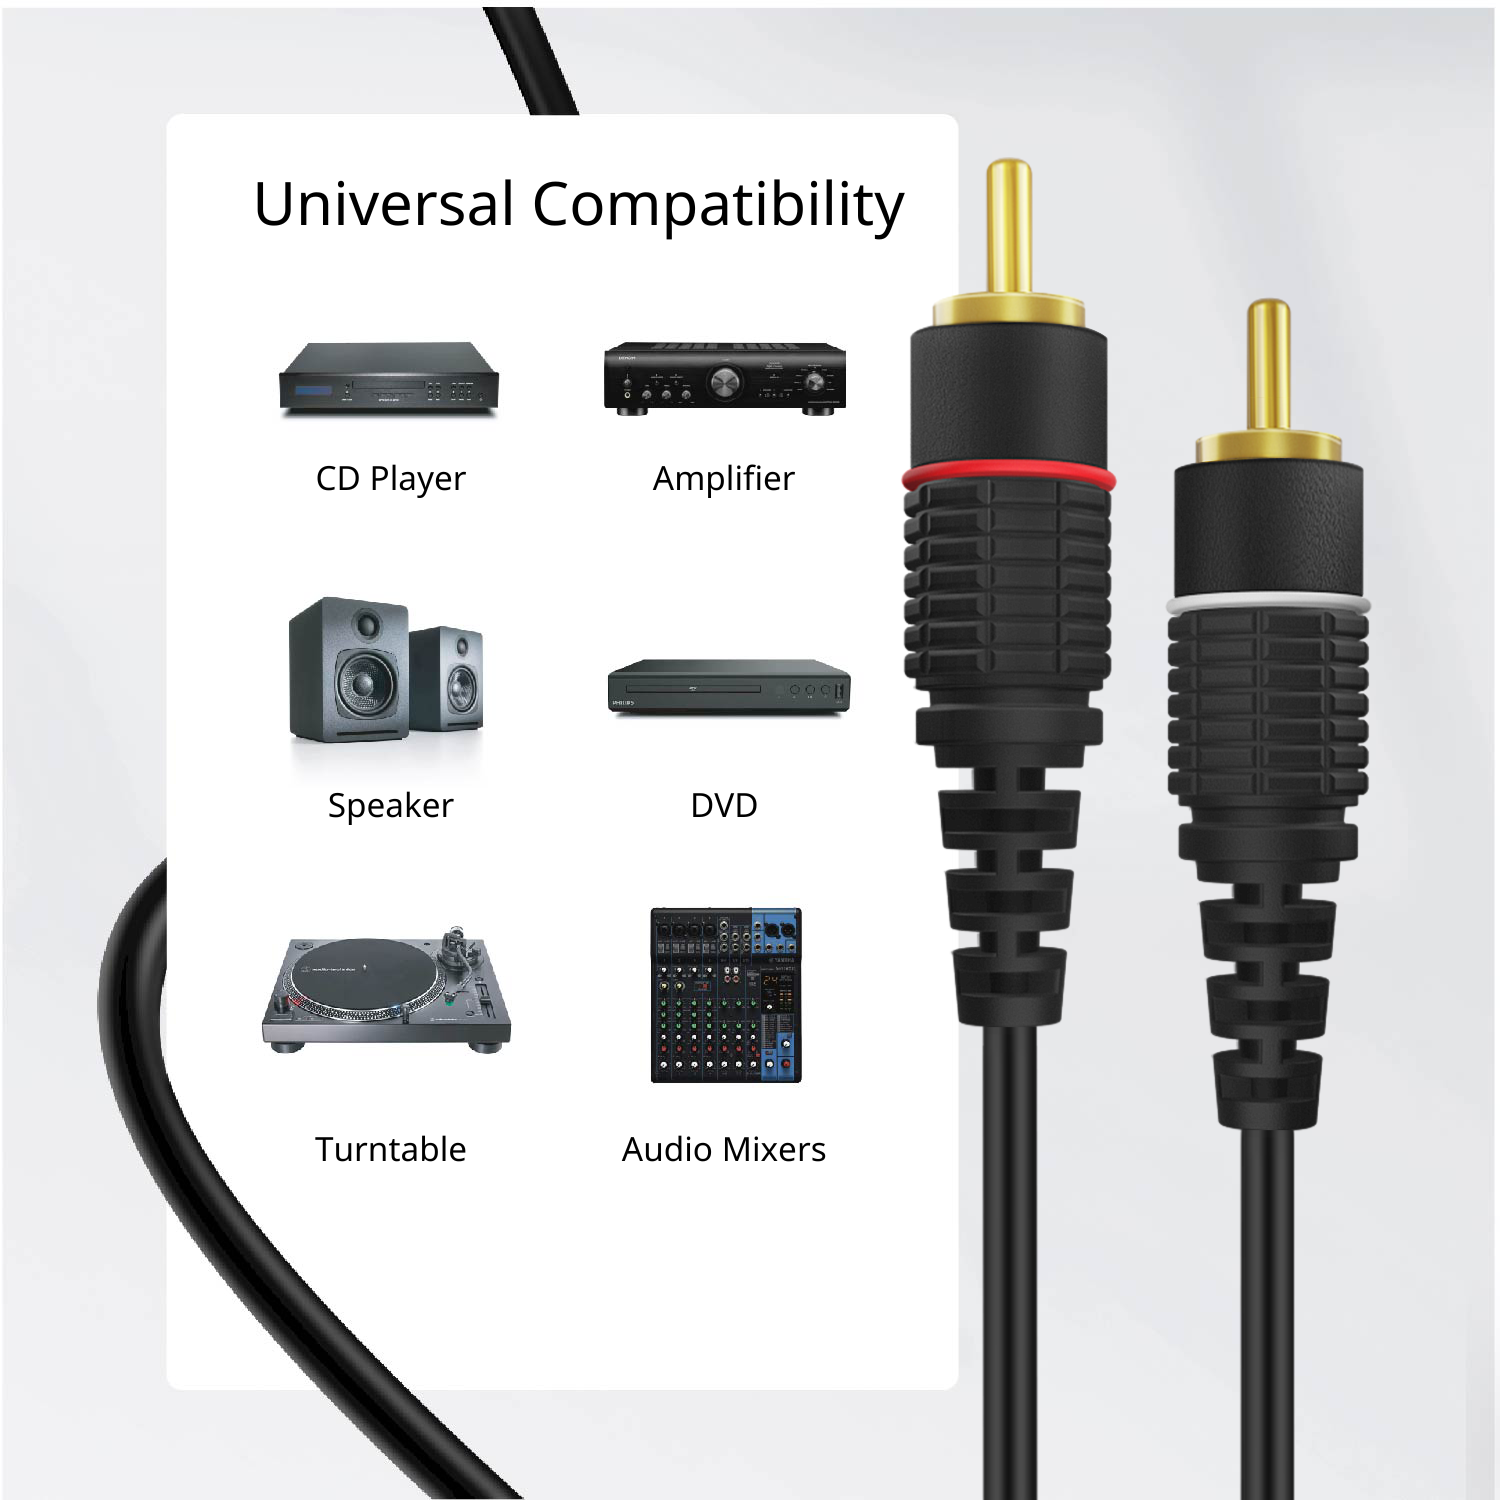 2RCA Stereo Audio Cable (6 Feet) - Dual RCA Plug M/M 2 Channel (Right and Left) Gold Plated Dual Shielded RCA to RCA Male Connectors Black - image 5 of 6